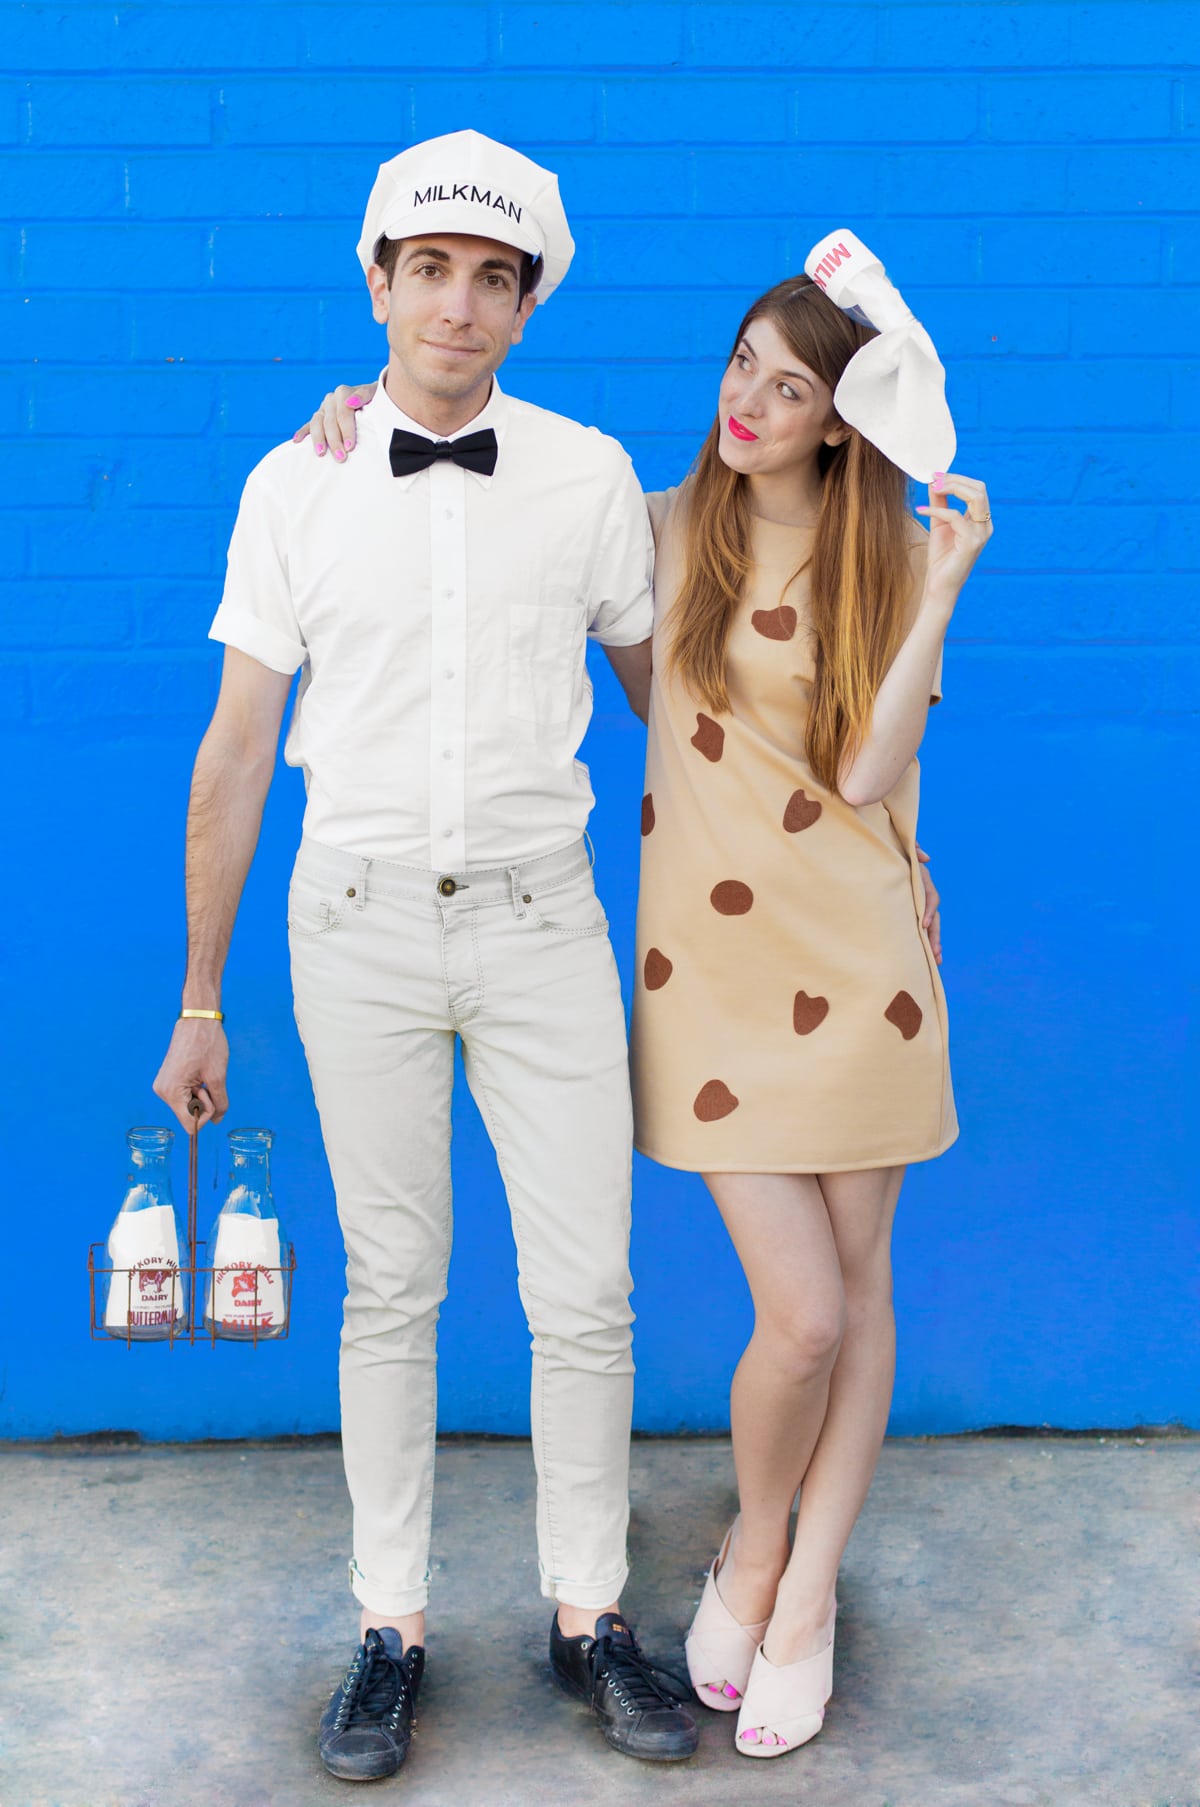 Man and Woman in DIY Couples costume: Milkman and cookie